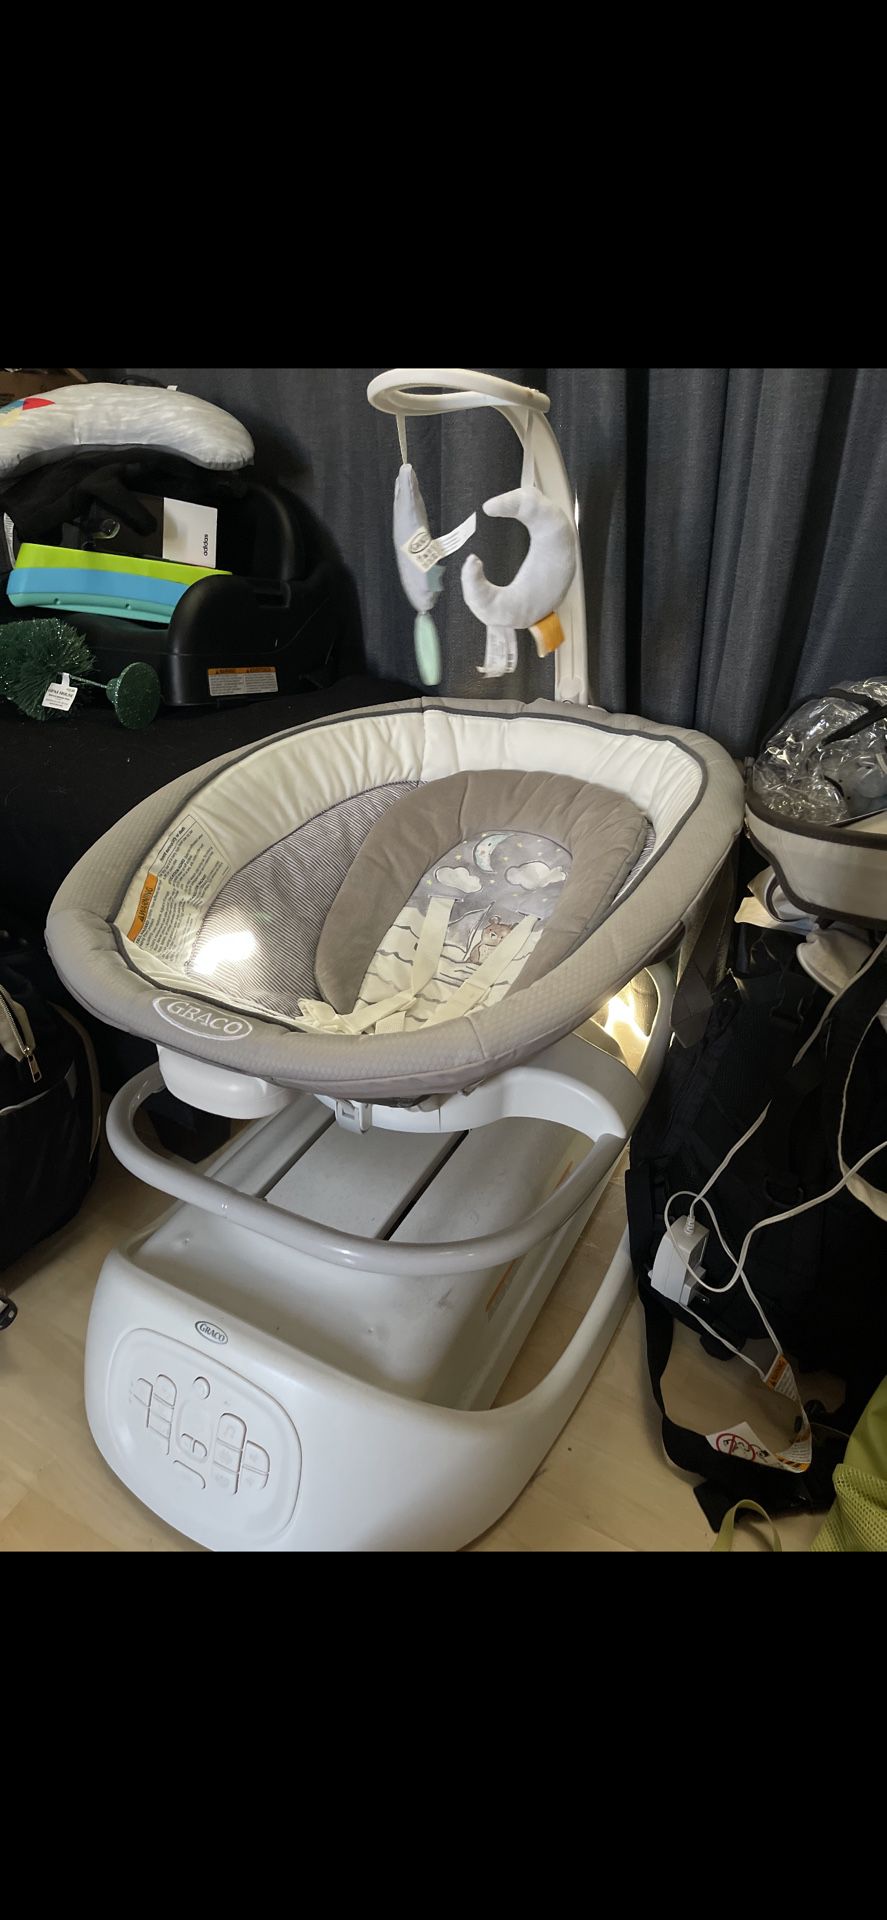 Graco Baby Sense2Soothe Swing with Cry Detection Technology